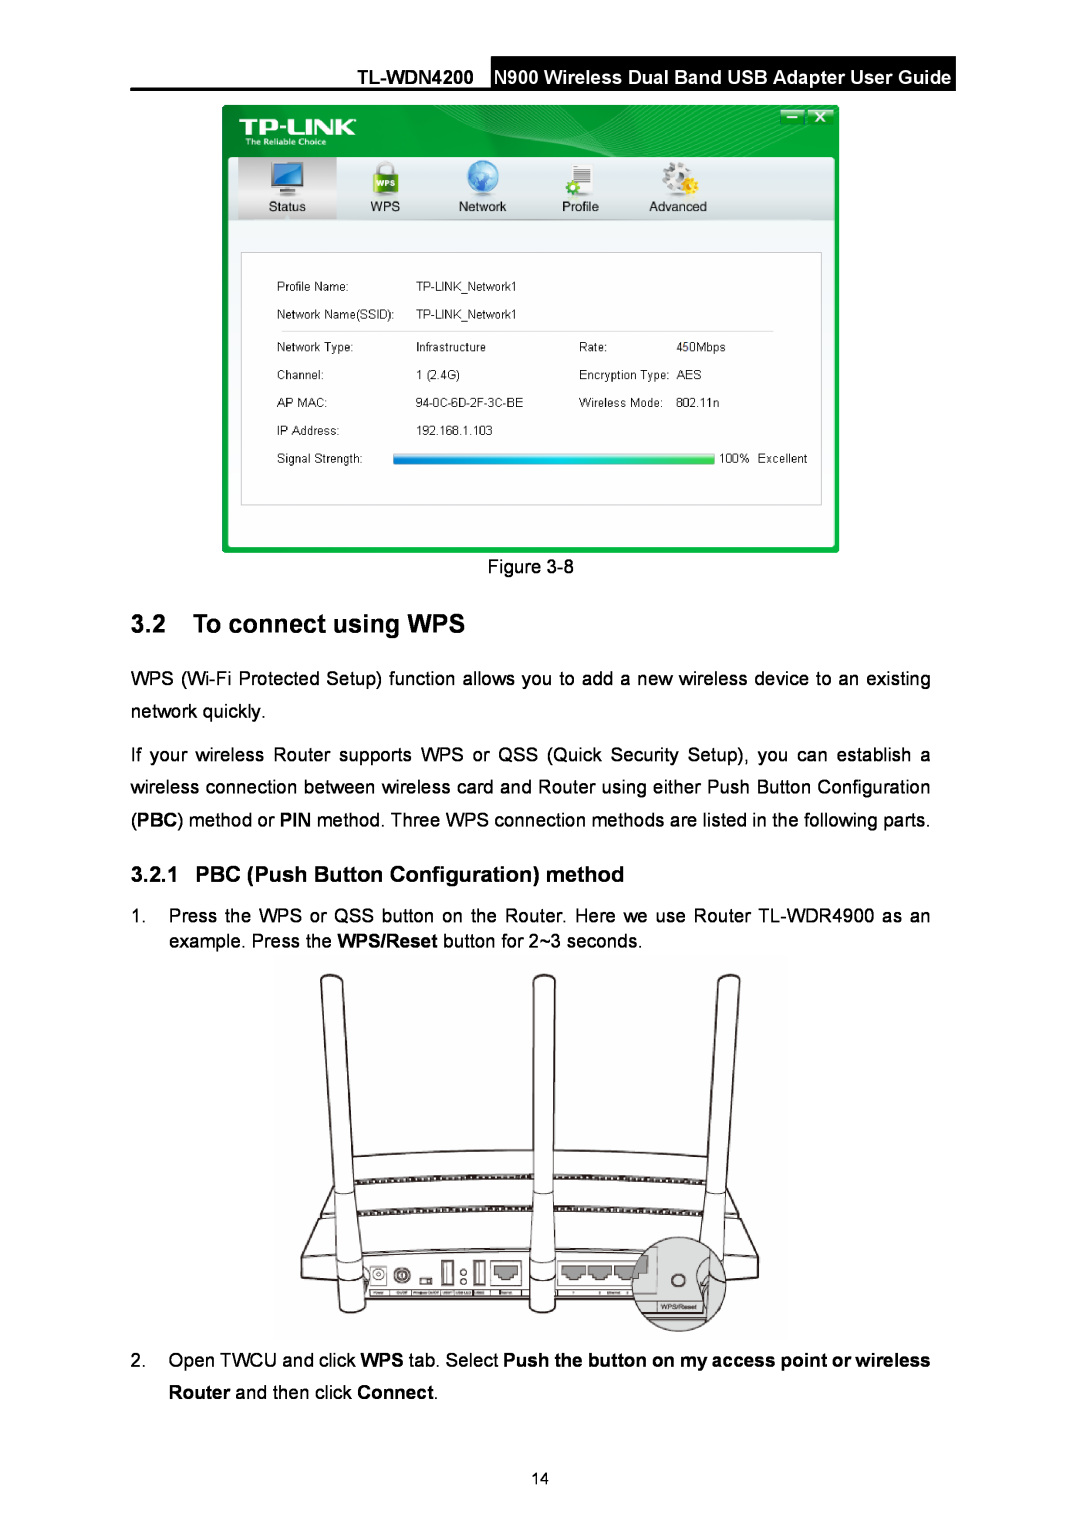 TP-Link TL-WDN4200 manual To connect using WPS, PBC Push Button Configuration method 